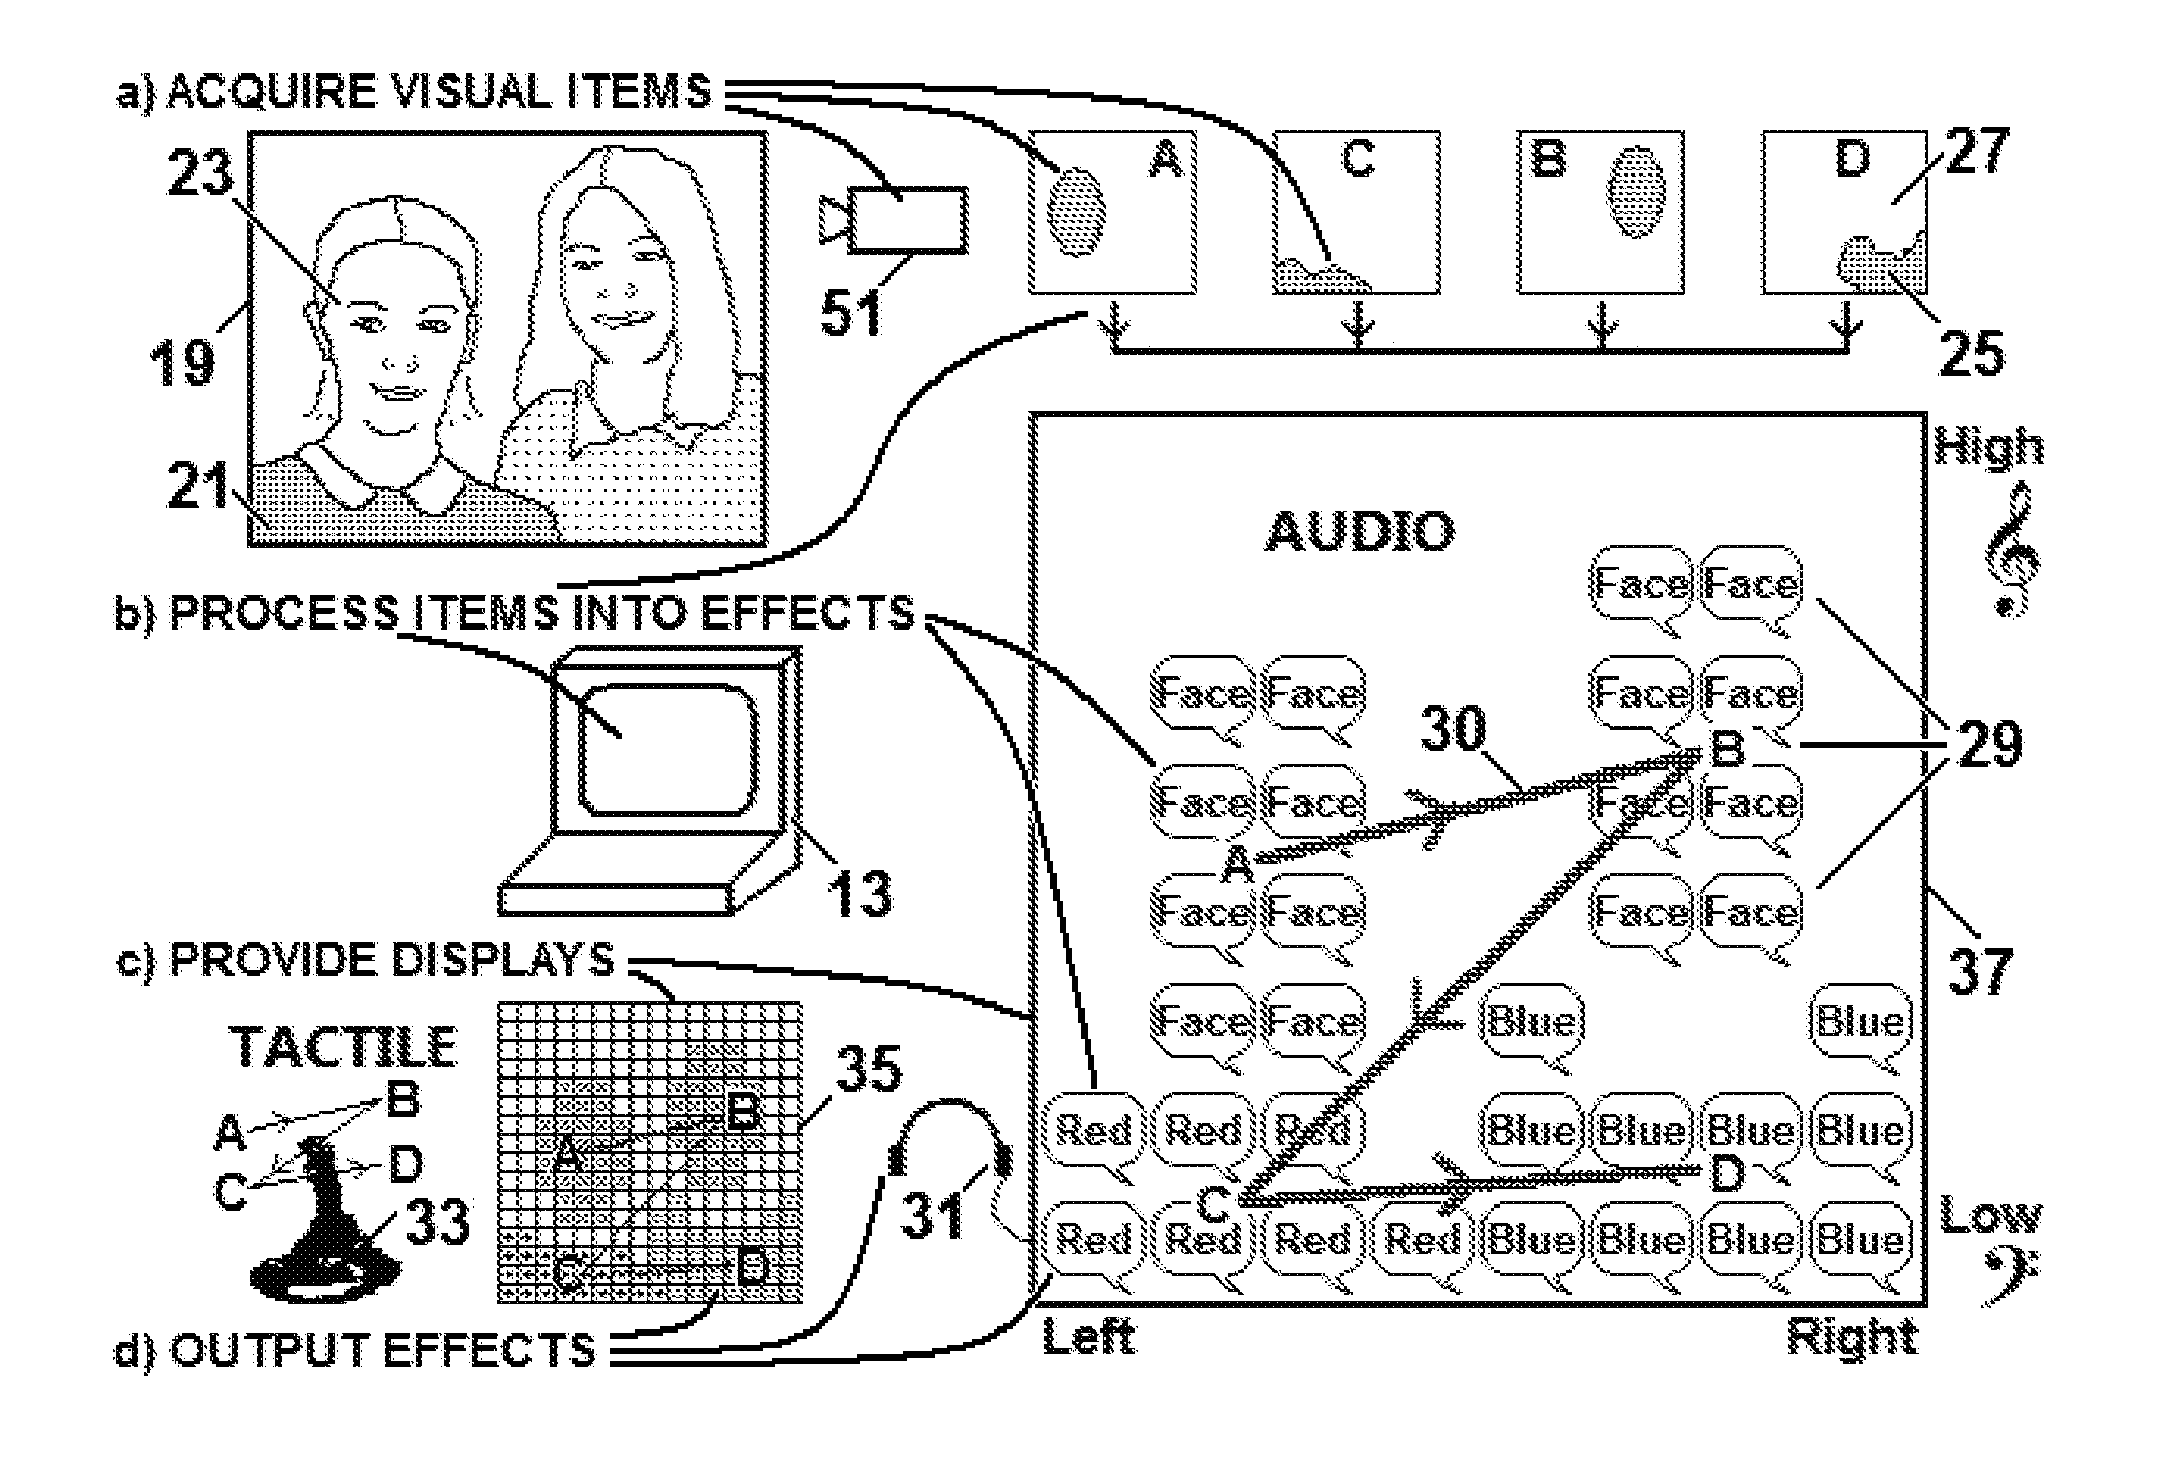 System for presenting visual items